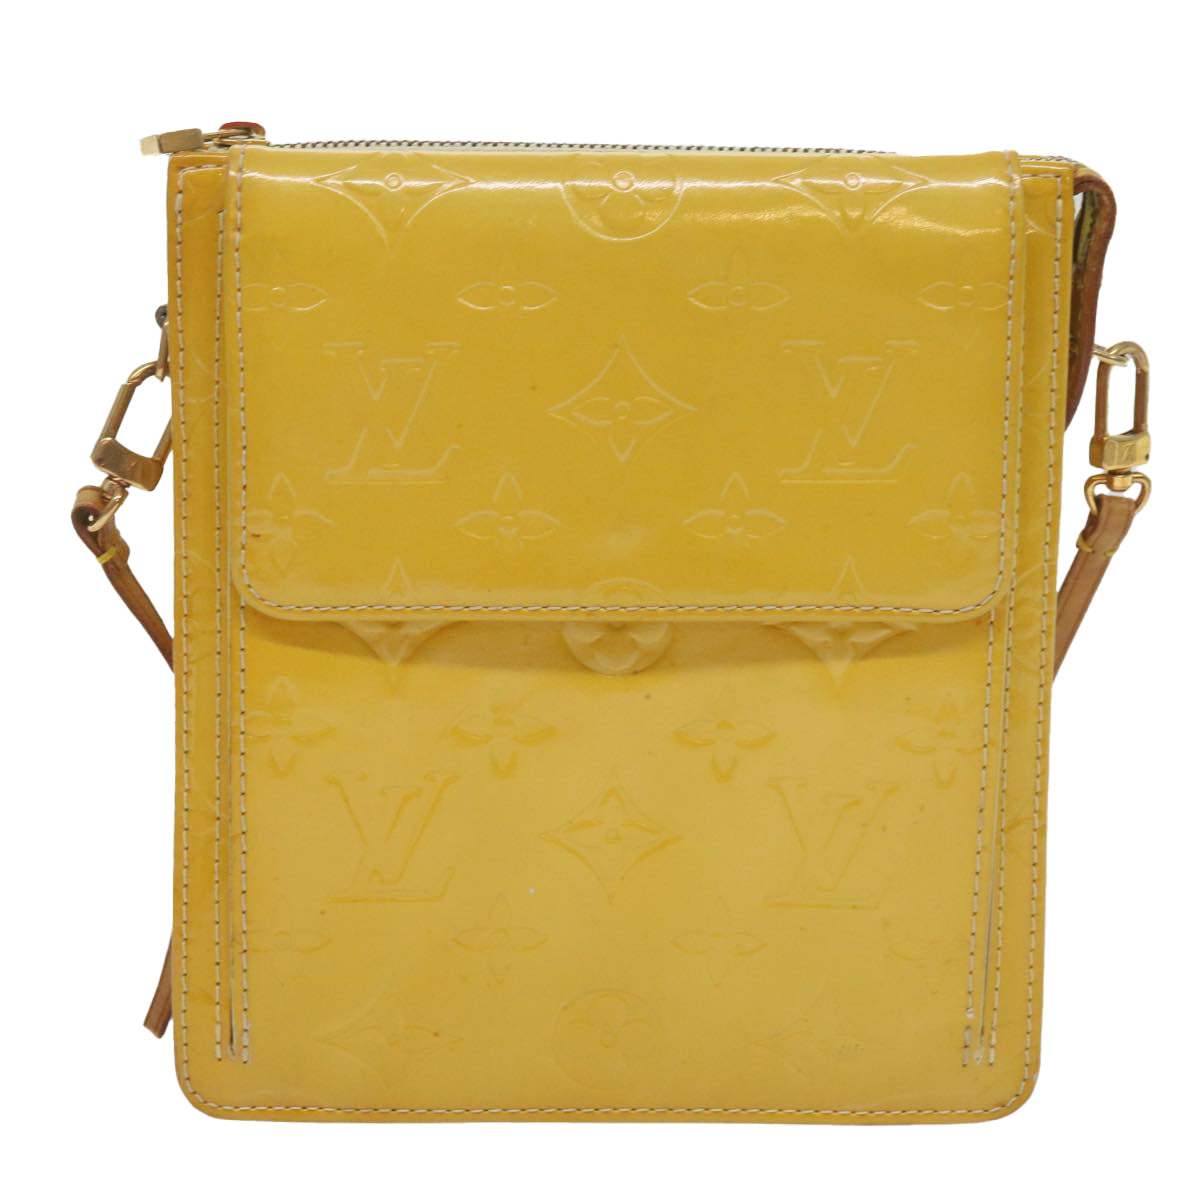 LOUIS VUITTON Monogram Vernis Motto Pouch Lime Yellow M91059 LV Auth bs12692